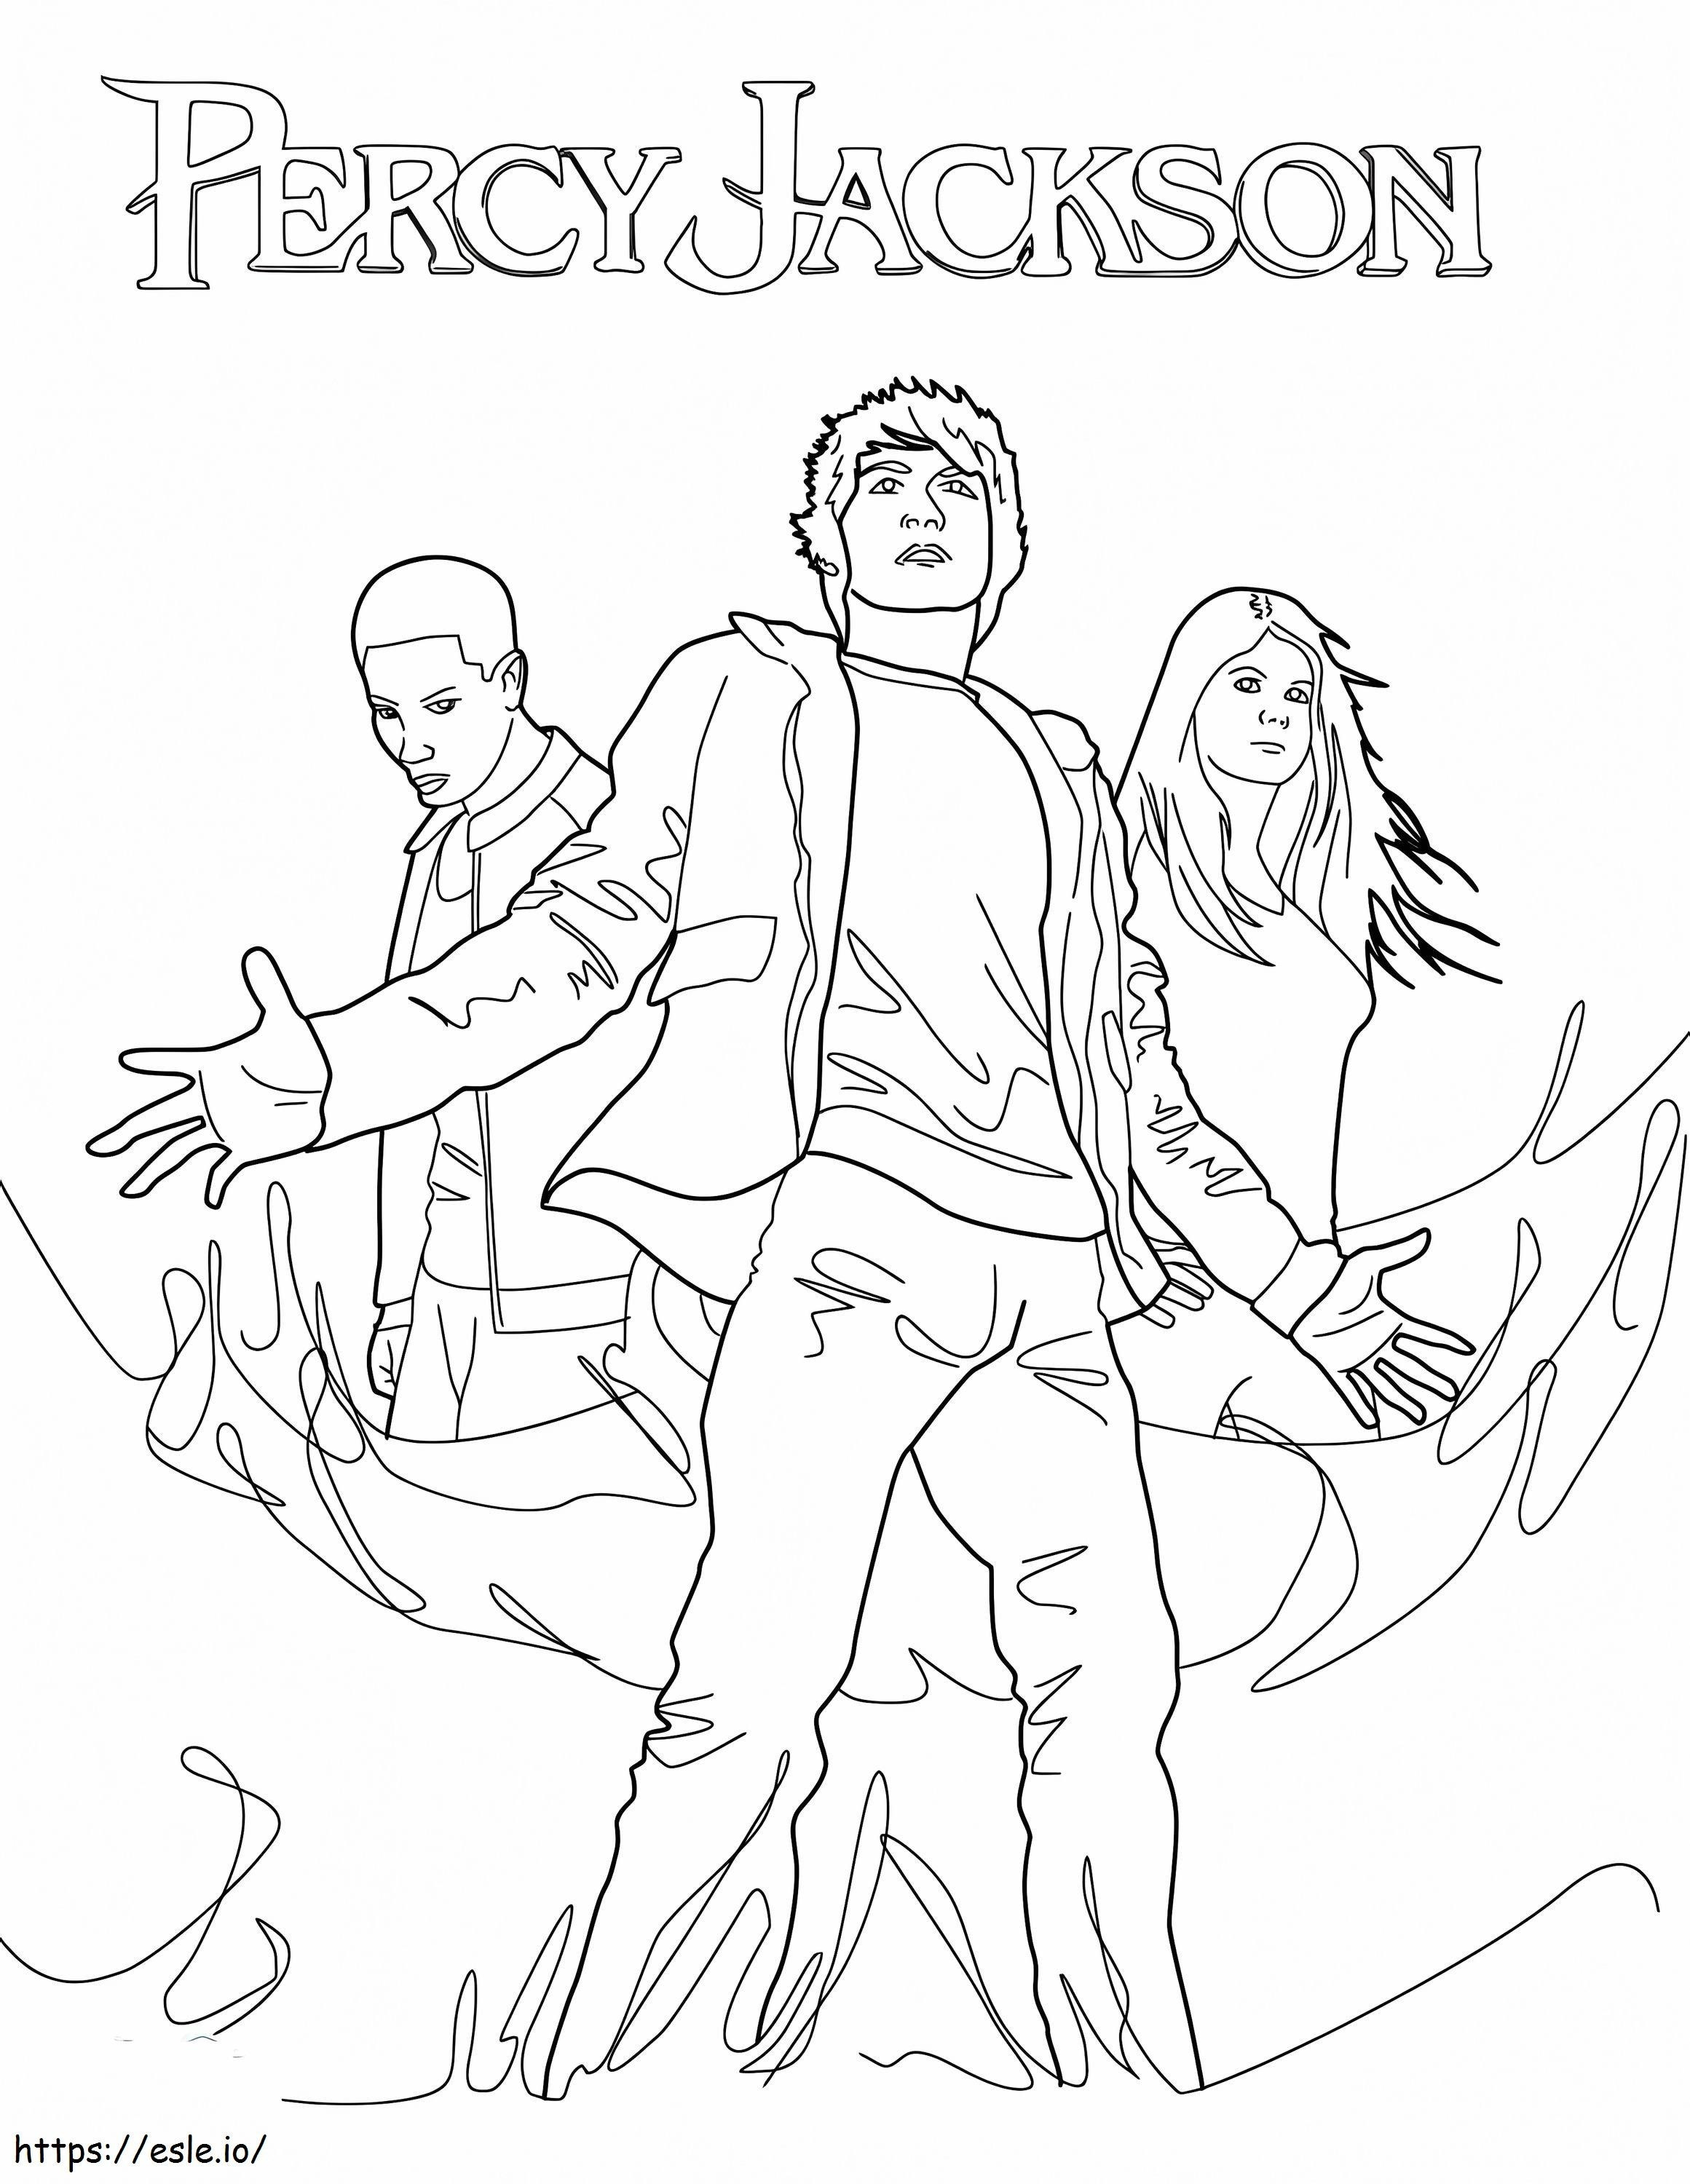 Percy Jackson coloring page